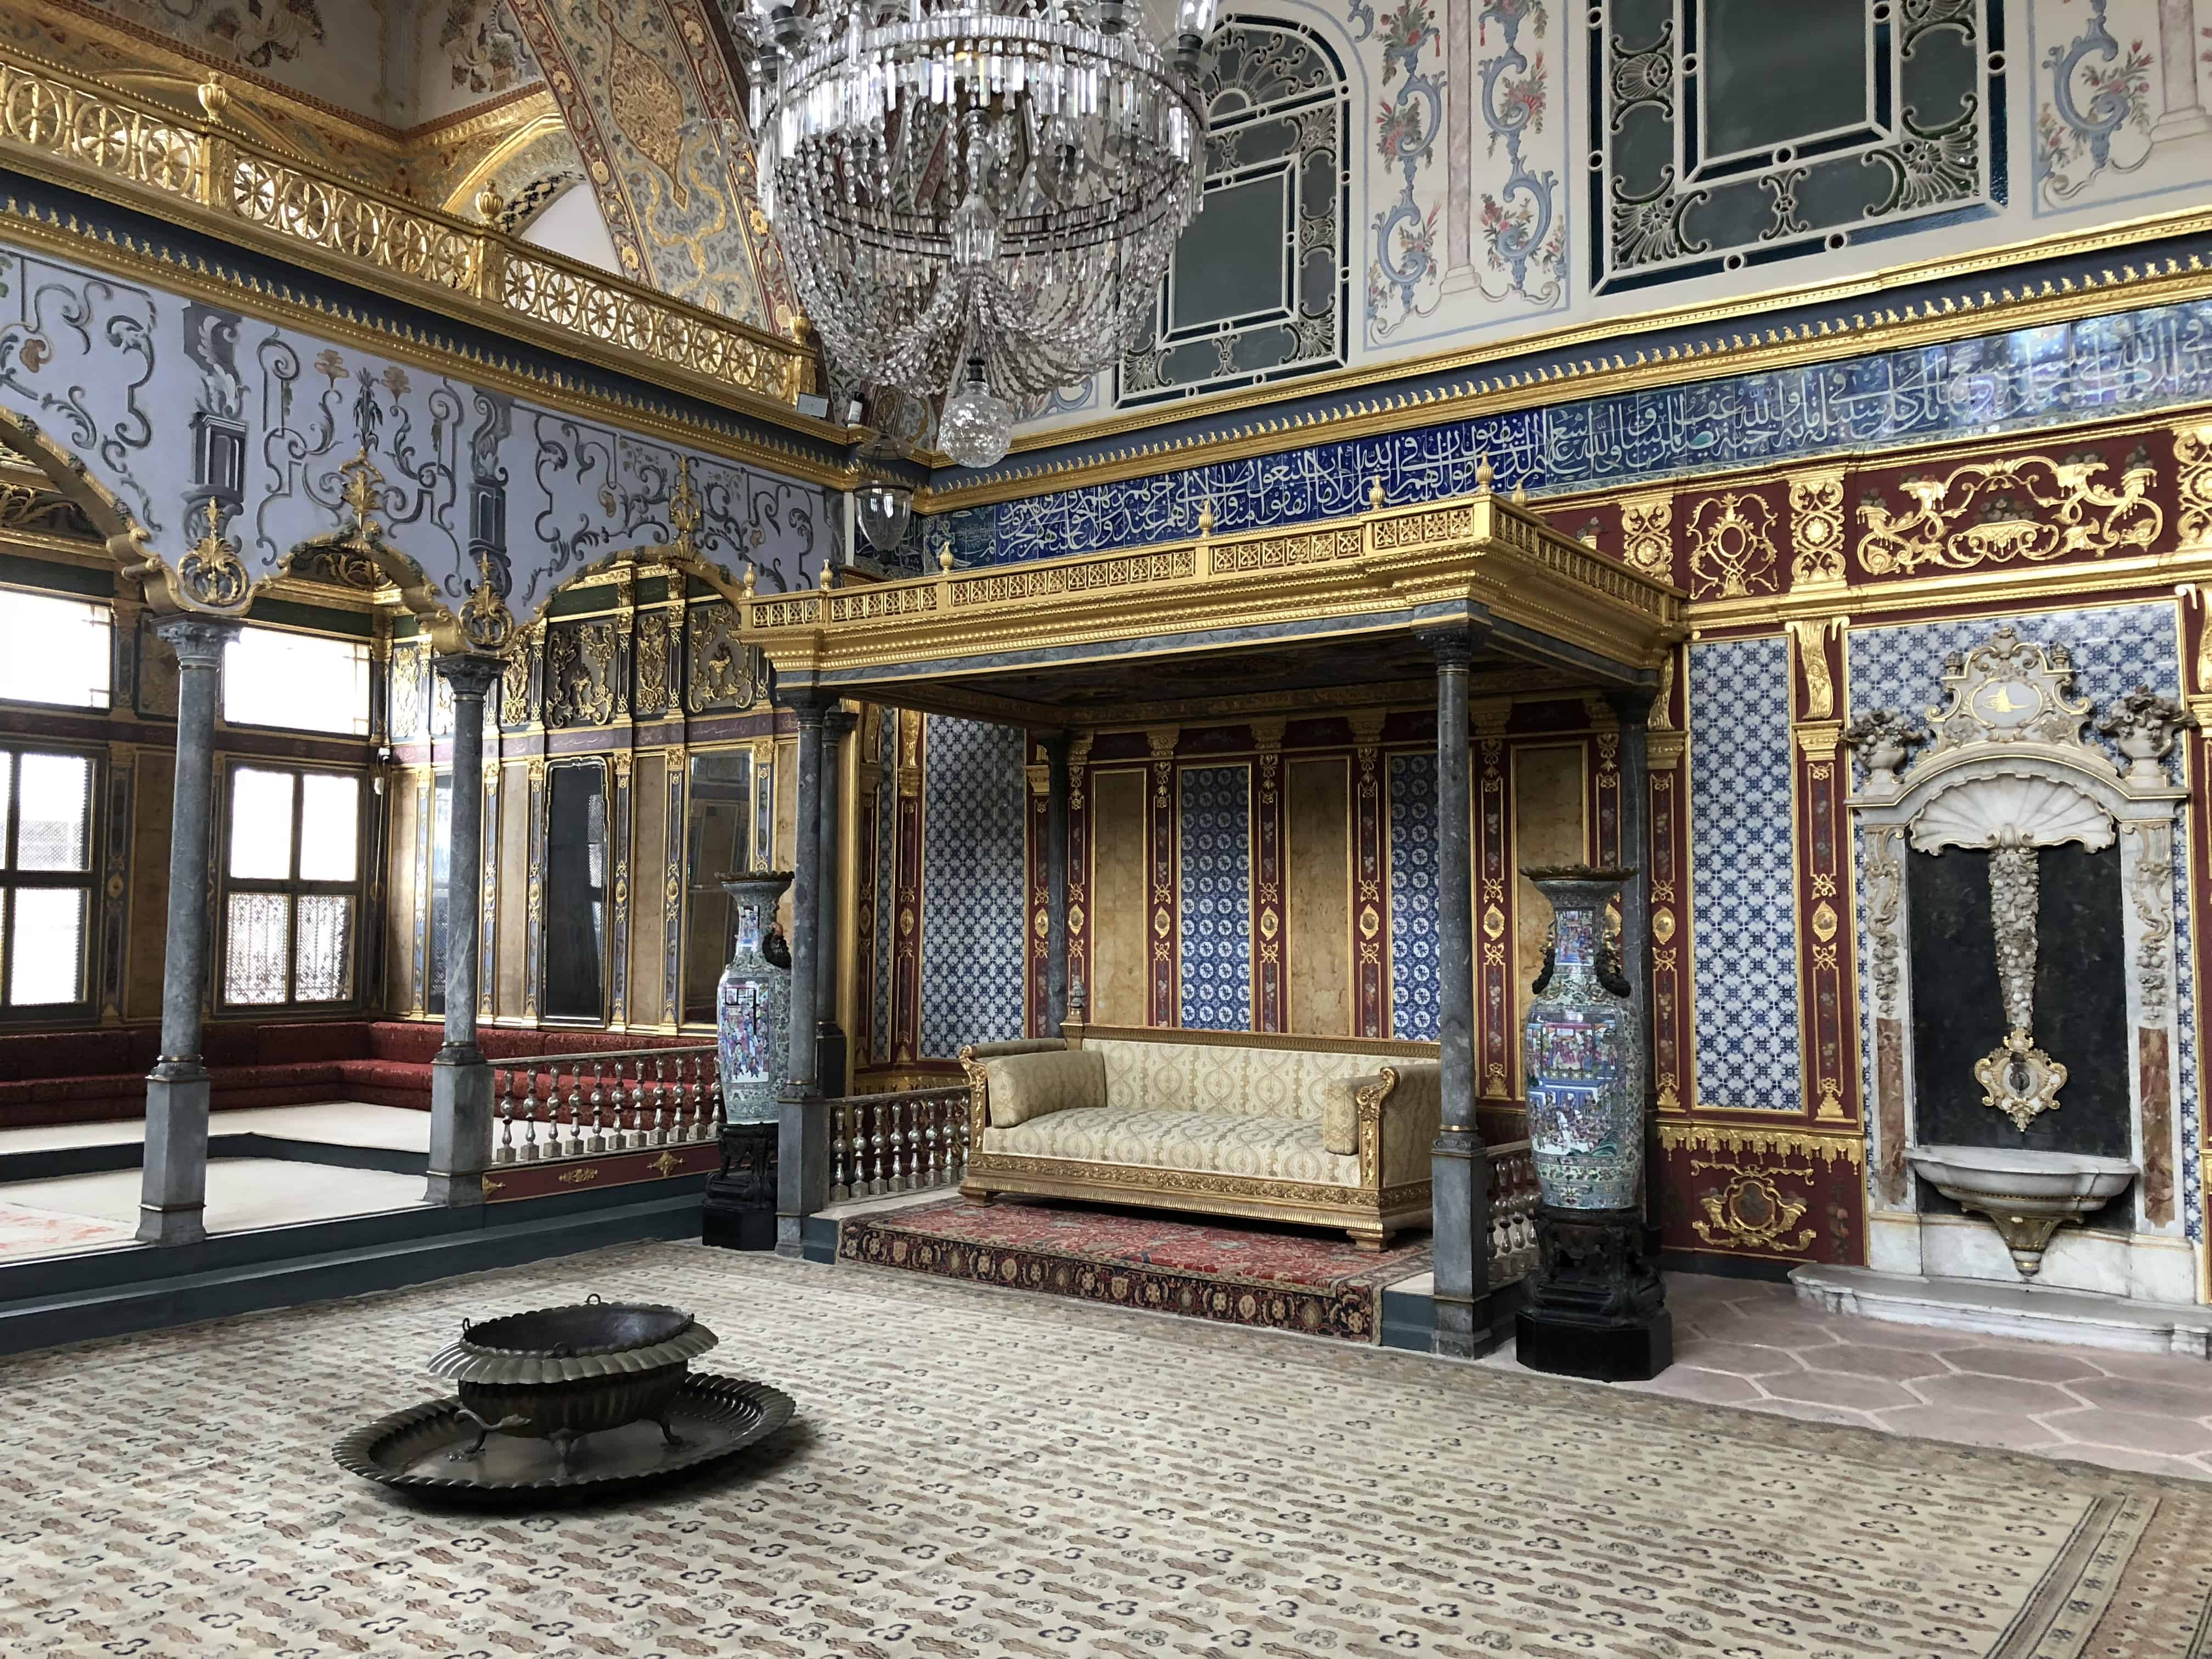 Throne in the Imperial Hall in the Imperial Harem at Topkapi Palace in Istanbul, Turkey